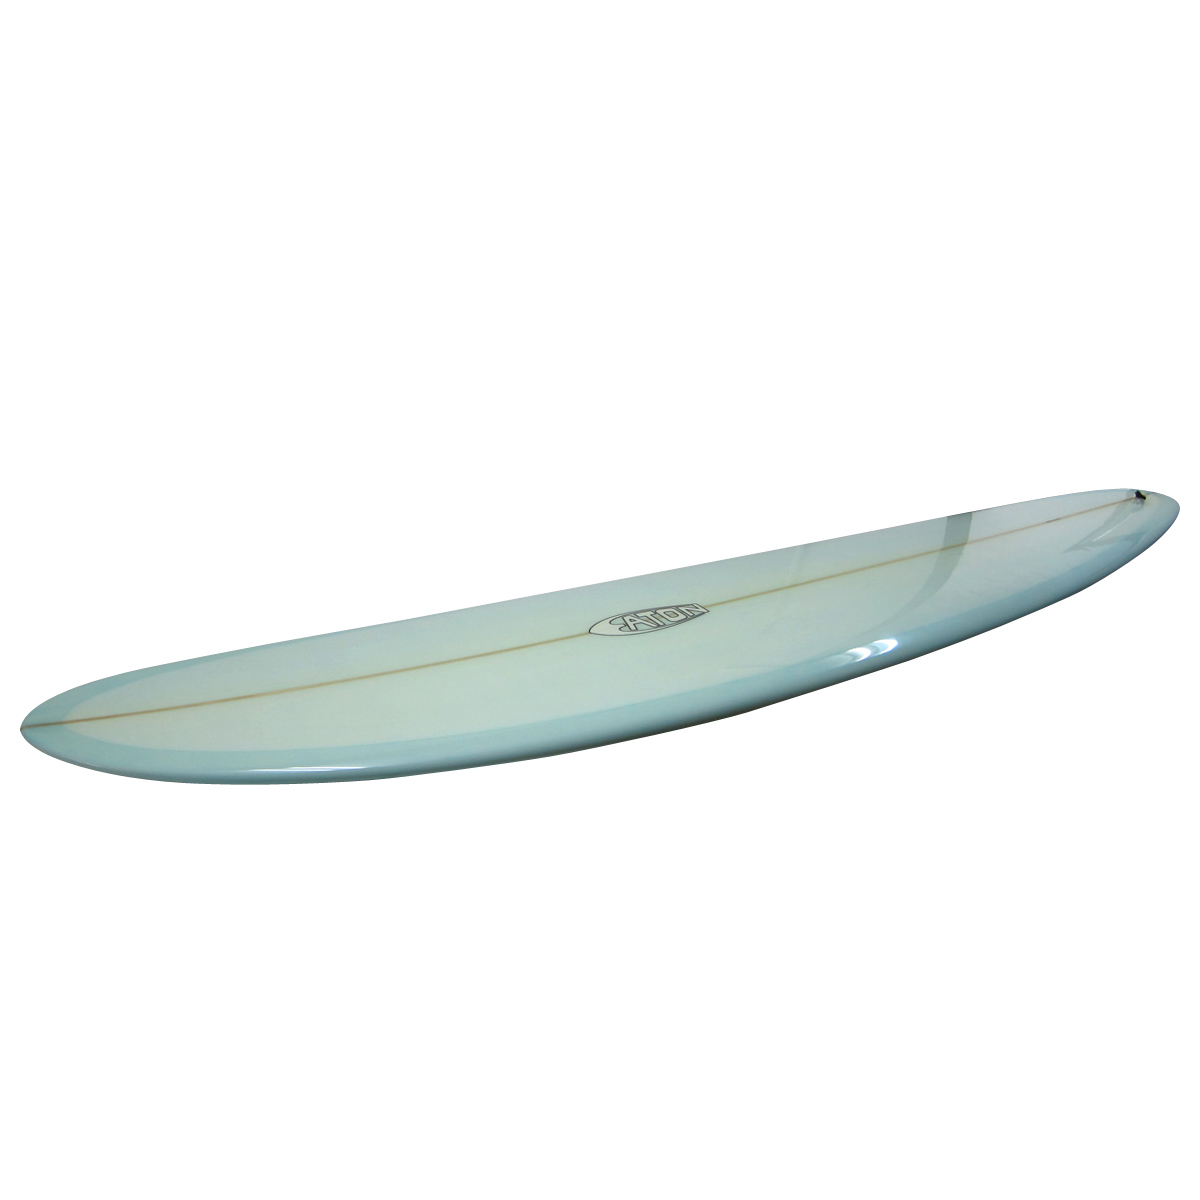 EATON SURFBOARDS / 9`3 Bonzer Shaped By Mike Eaton